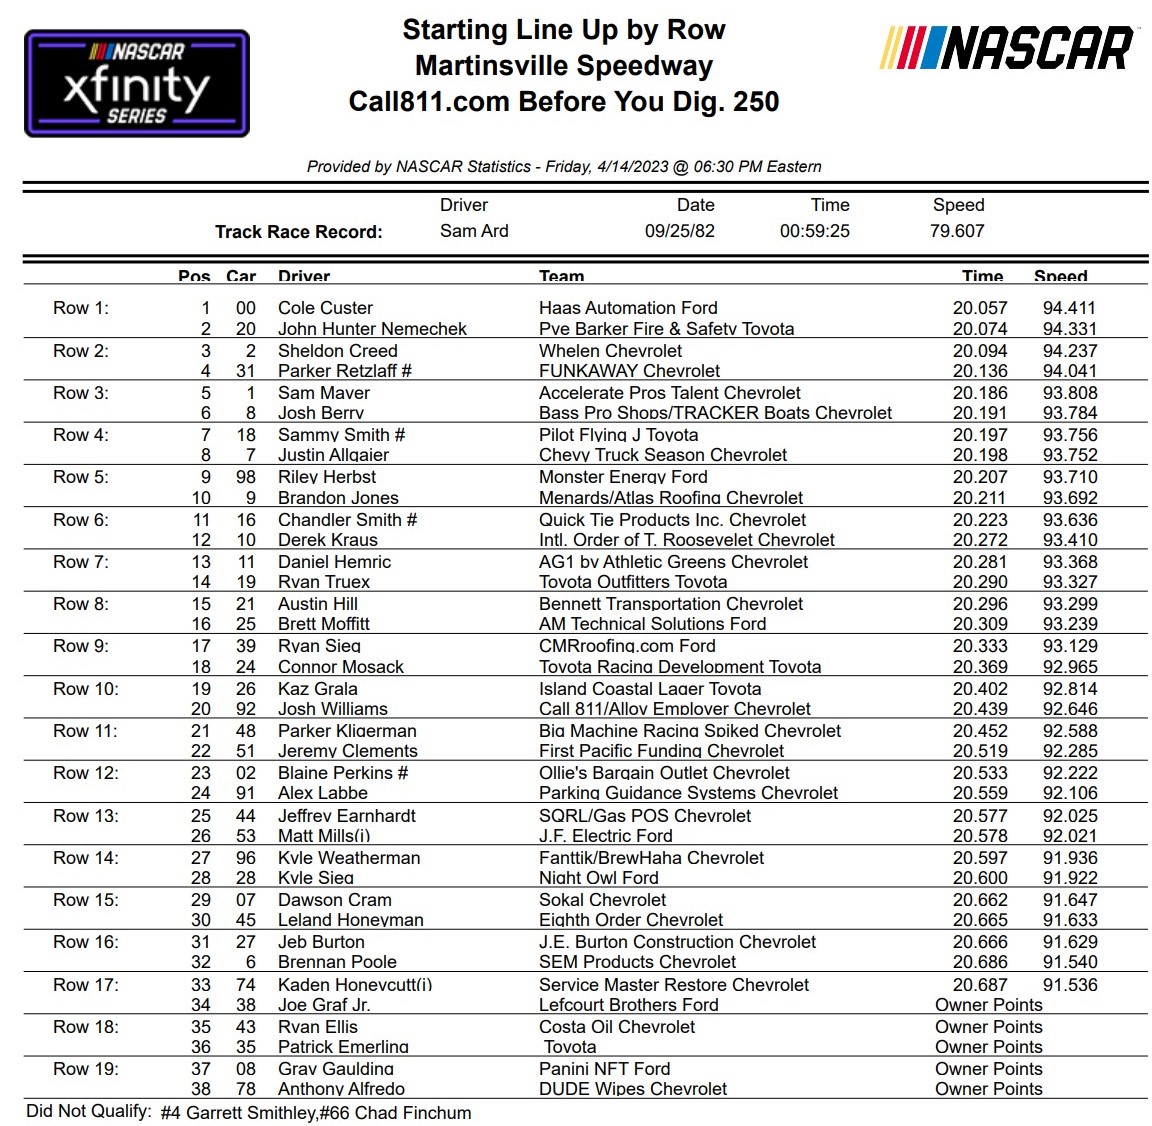 Xfinity Series Martinsville Qualifying Results/ Starting Lineup